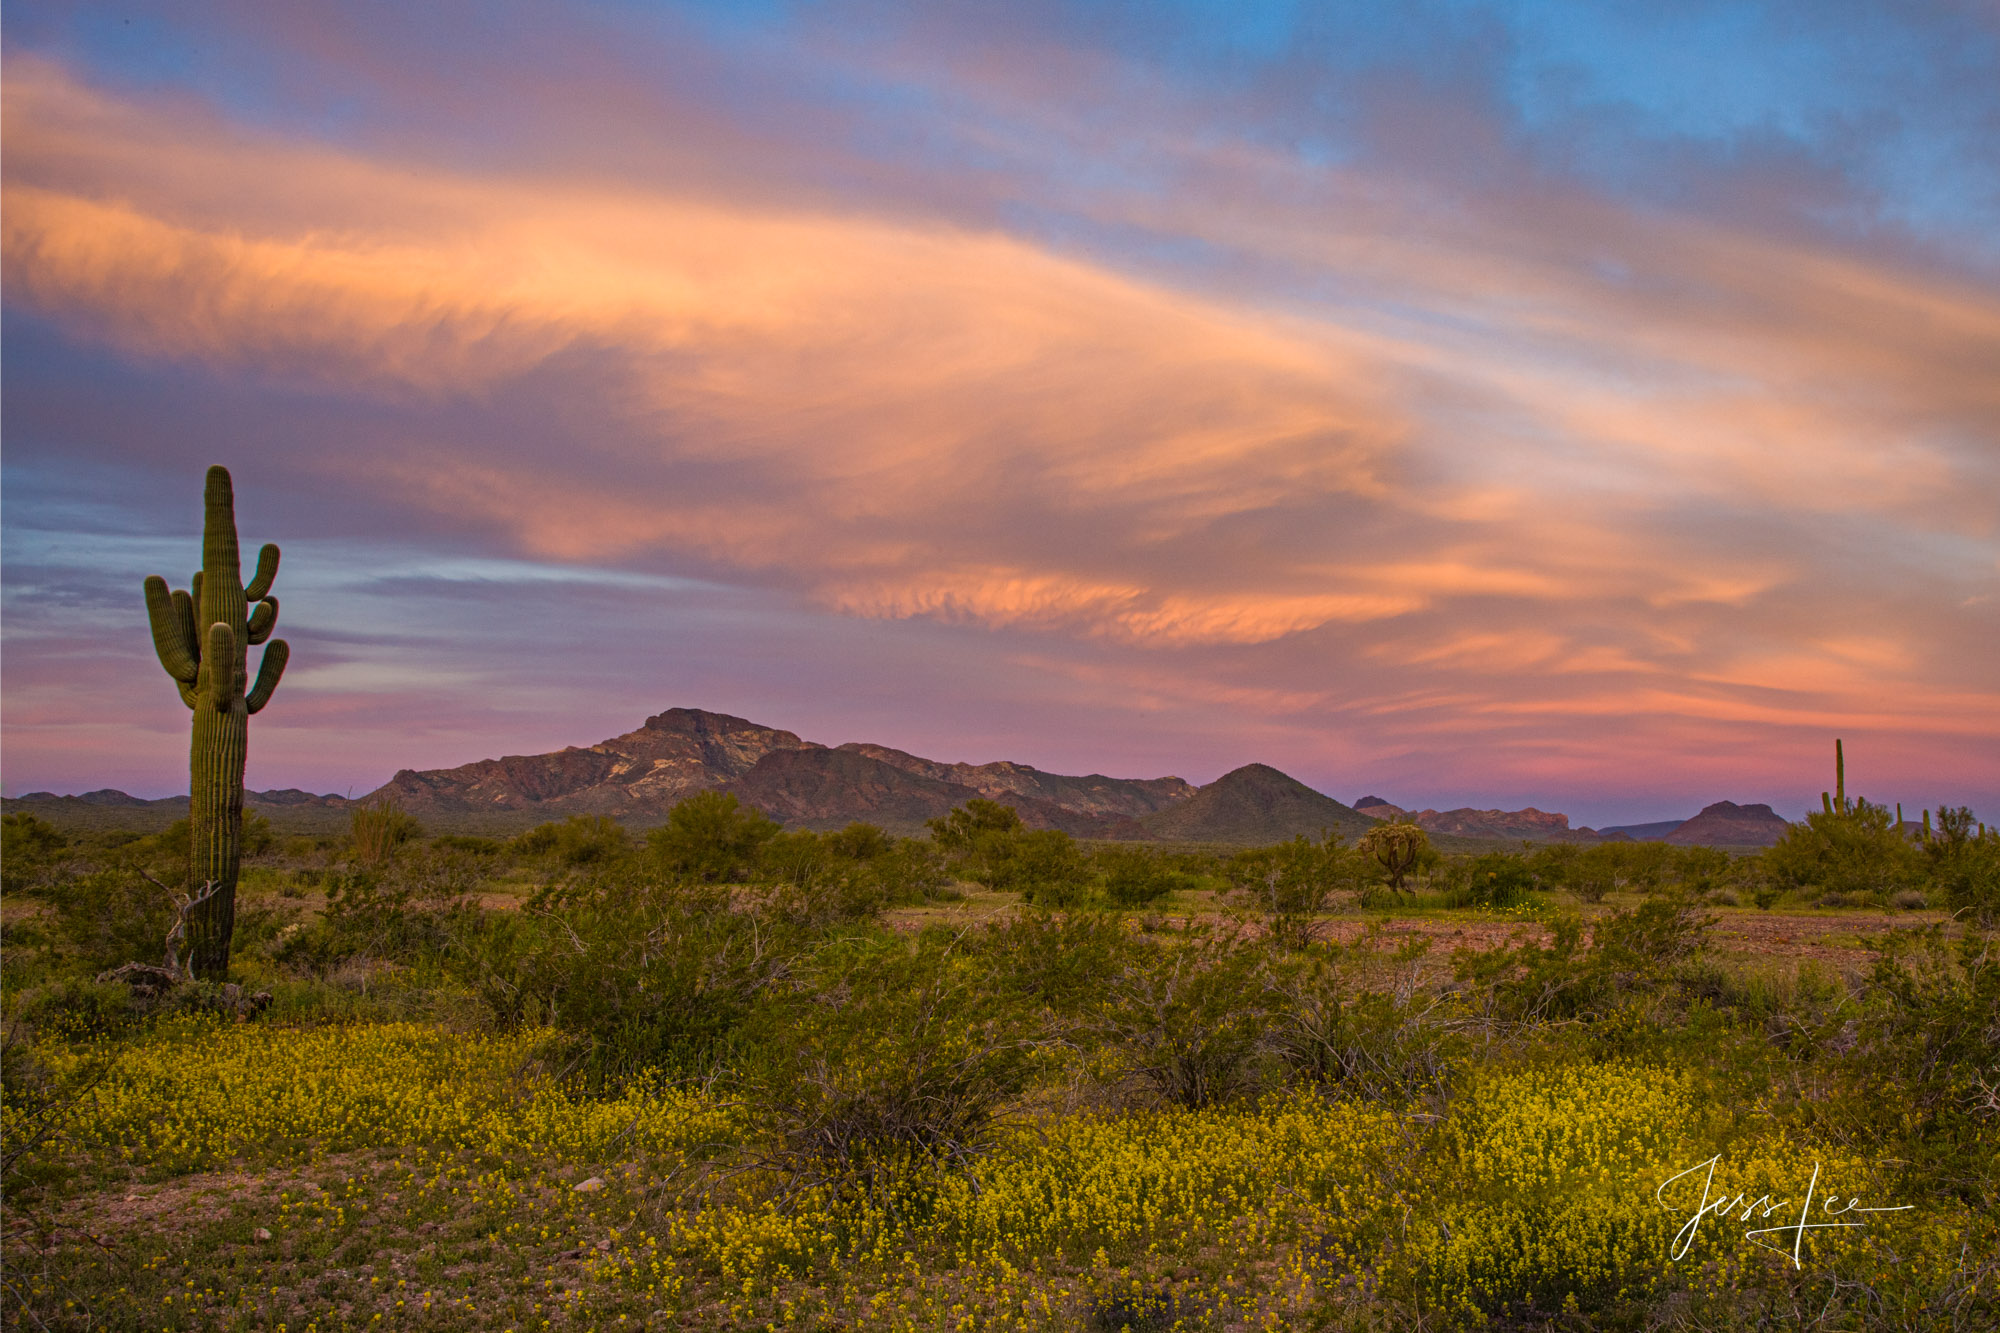 Spring flowers blooming across the Arizona landscape. 